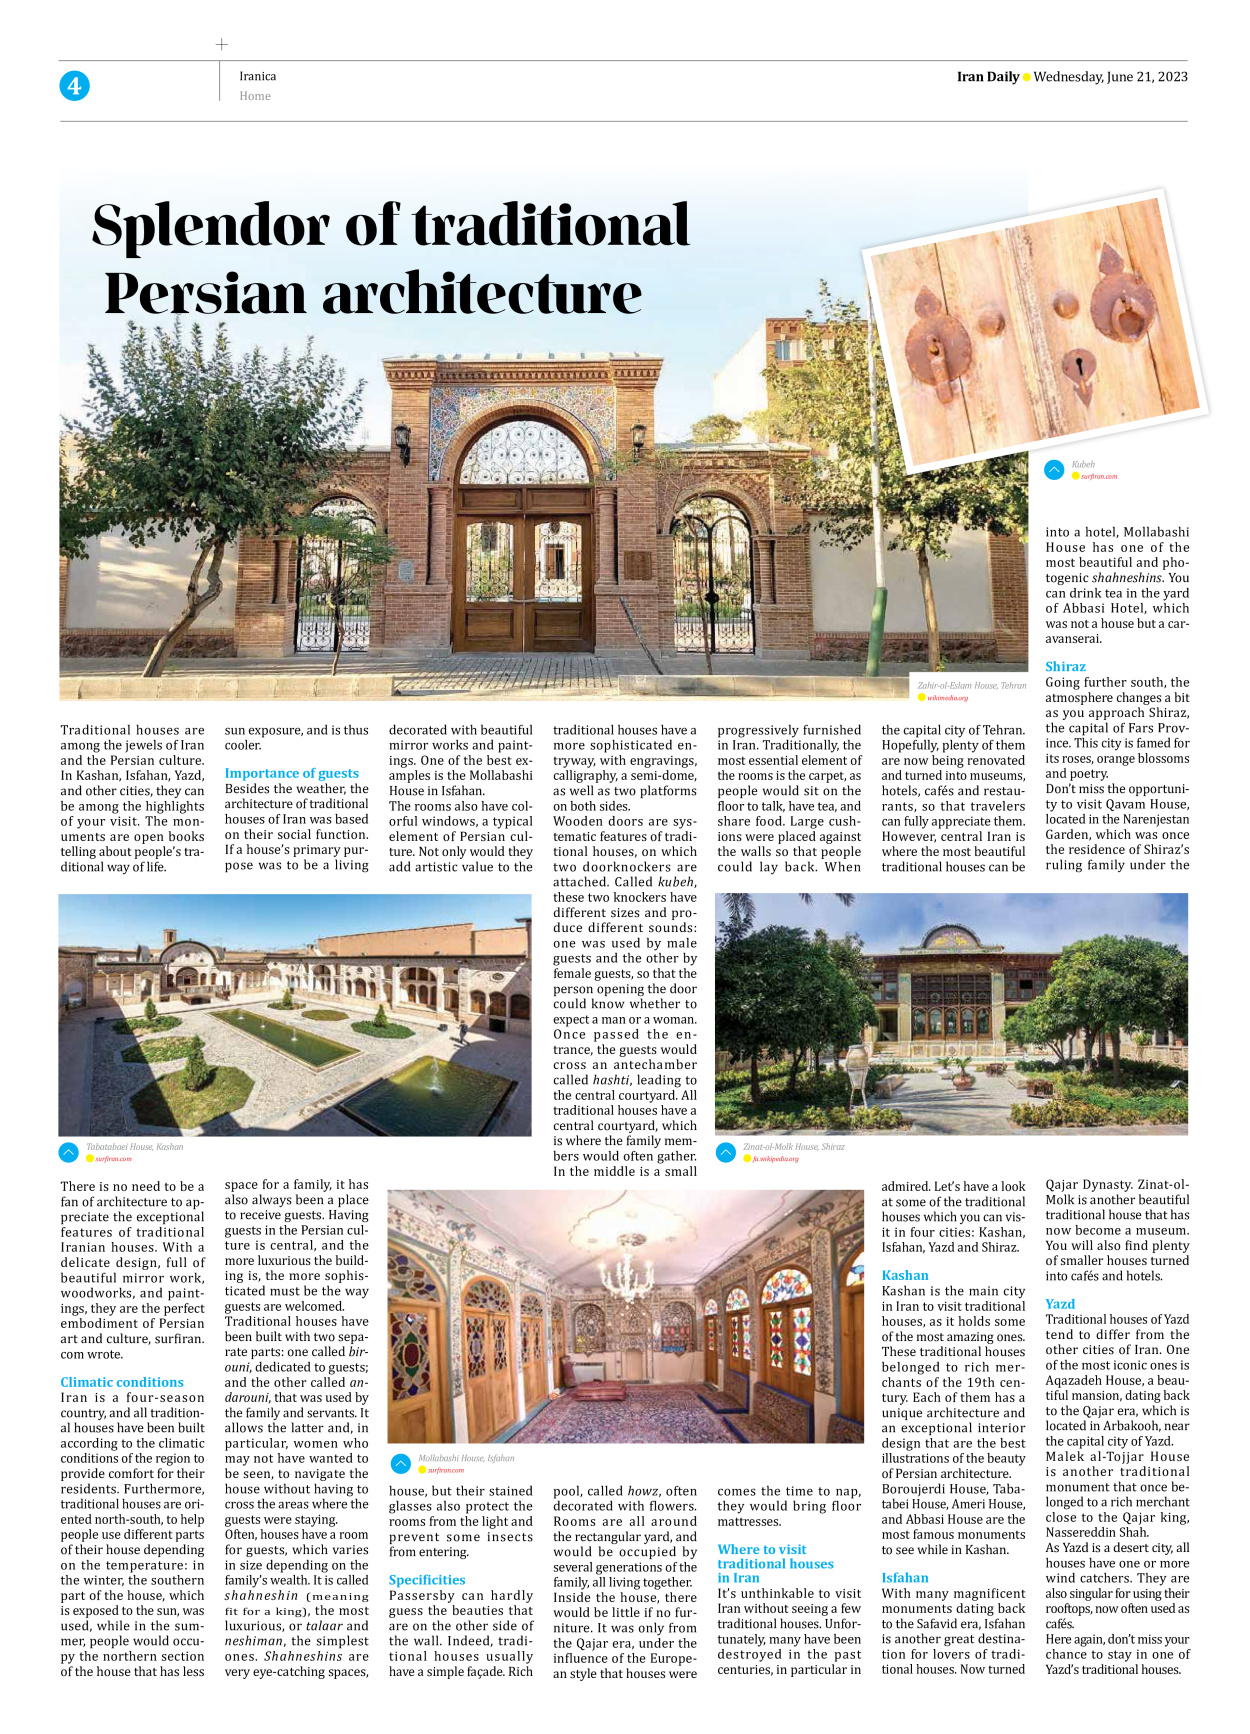 Iran Daily - Number Seven Thousand Three Hundred and Twenty - 21 June 2023 - Page 4